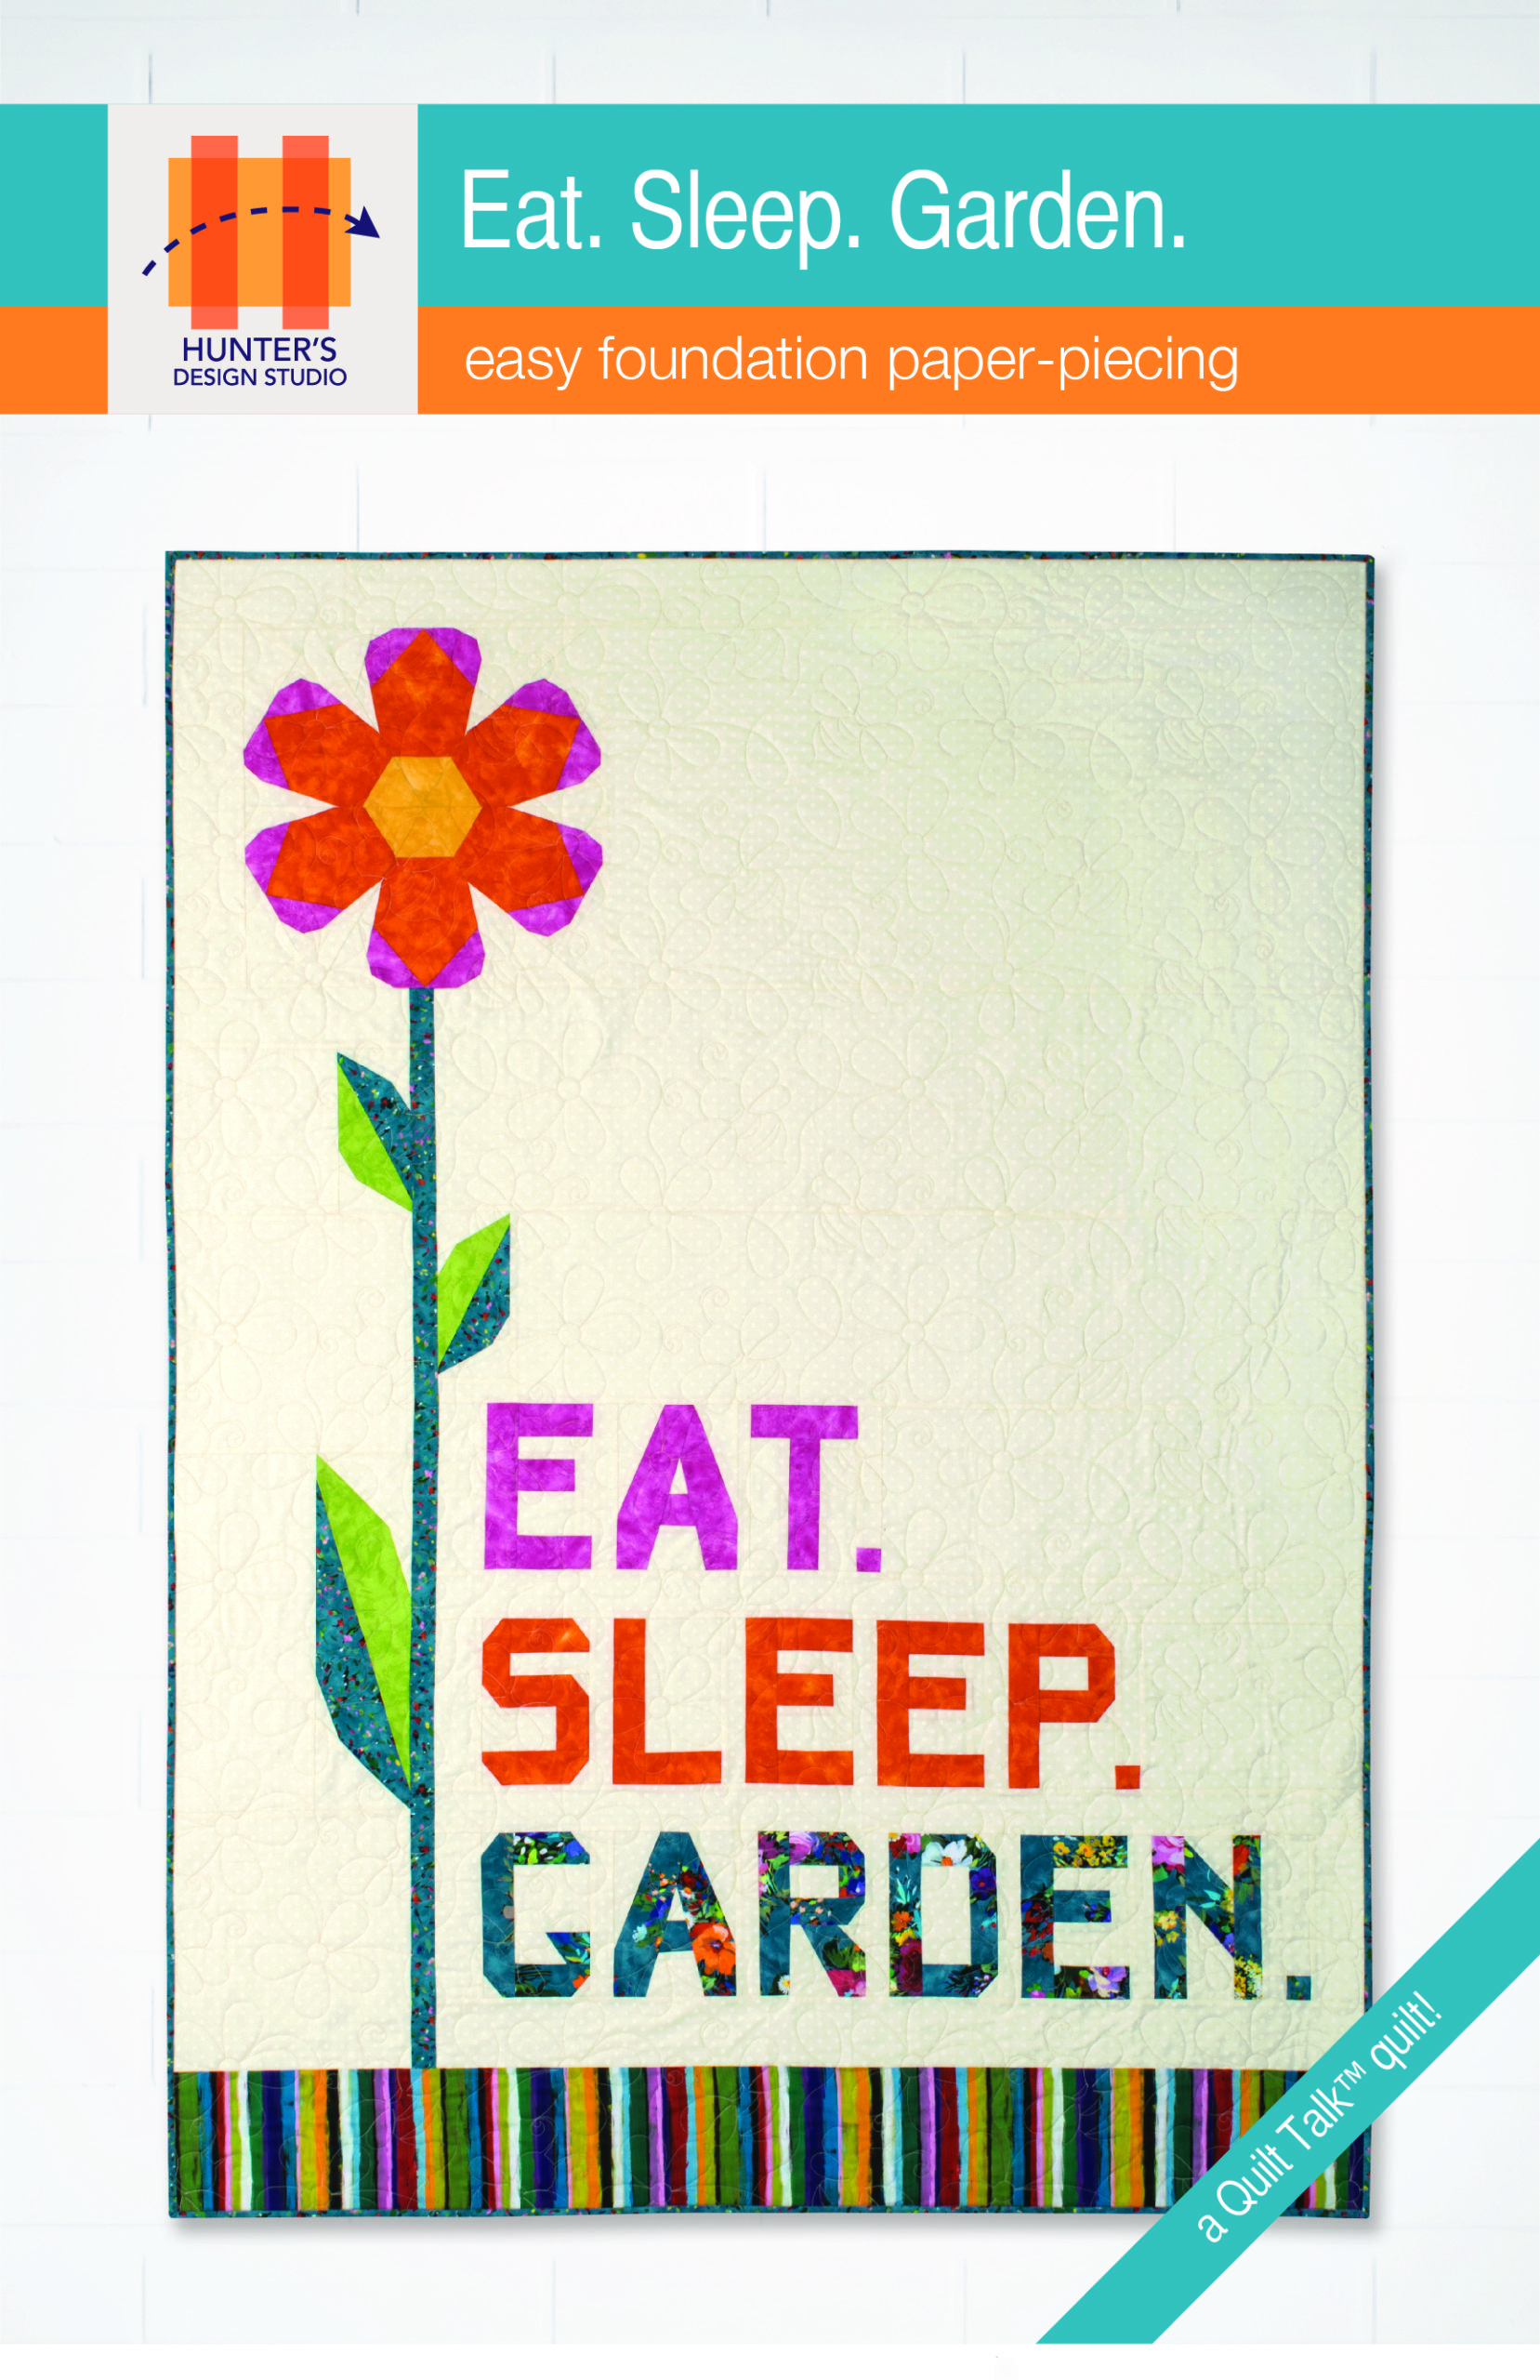 Eat Sleep Garden features easy foundation paper-pieced letters and a flower make this cheerful floral quilt with a fun message for your favorite garden lover.